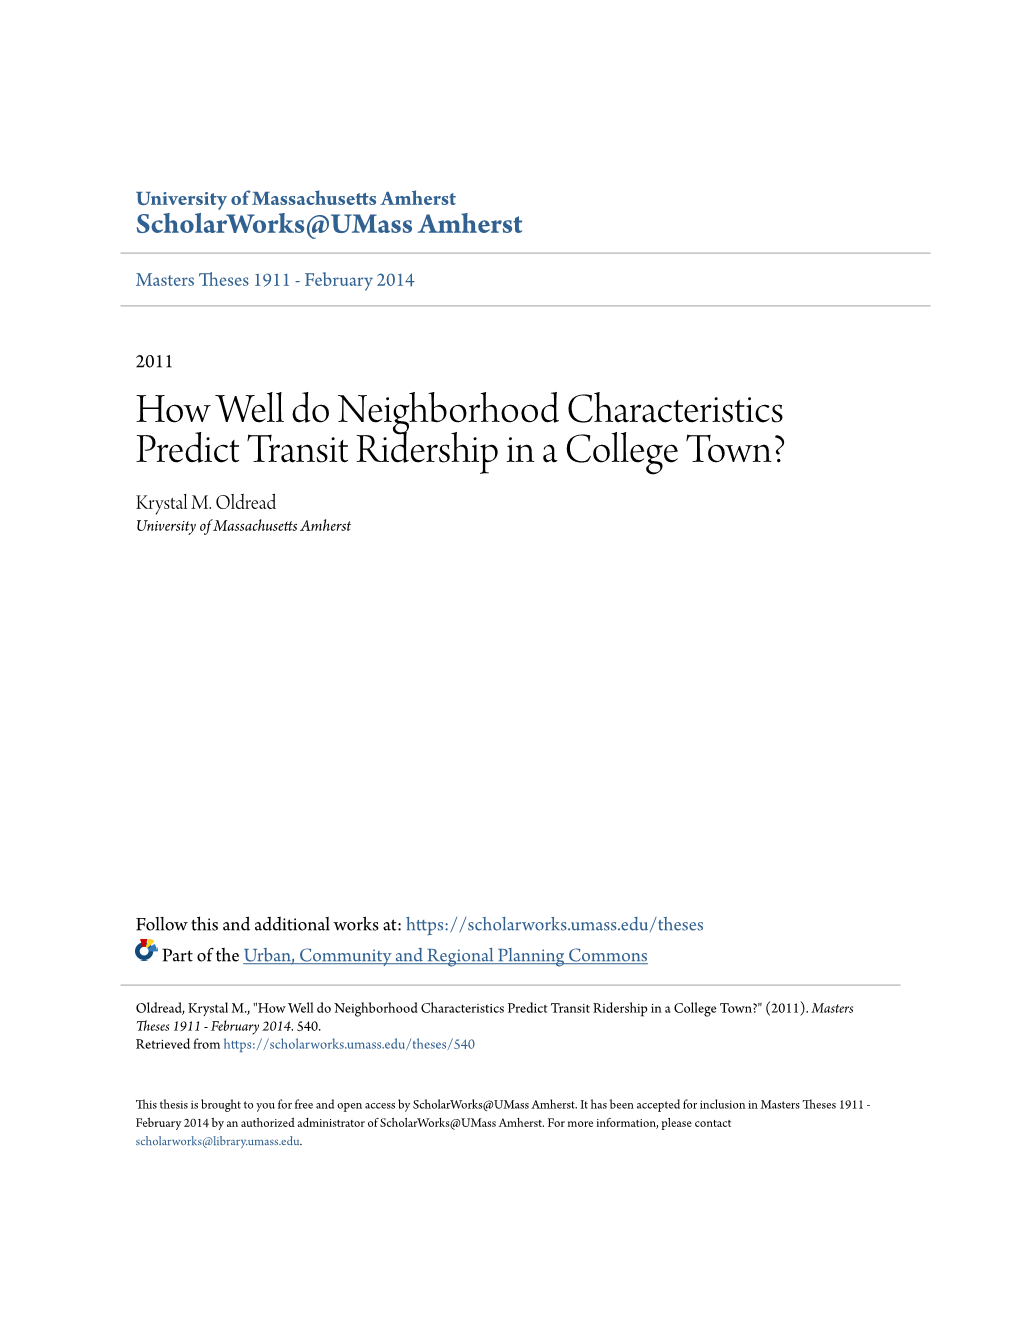 How Well Do Neighborhood Characteristics Predict Transit Ridership in a College Town? Krystal M